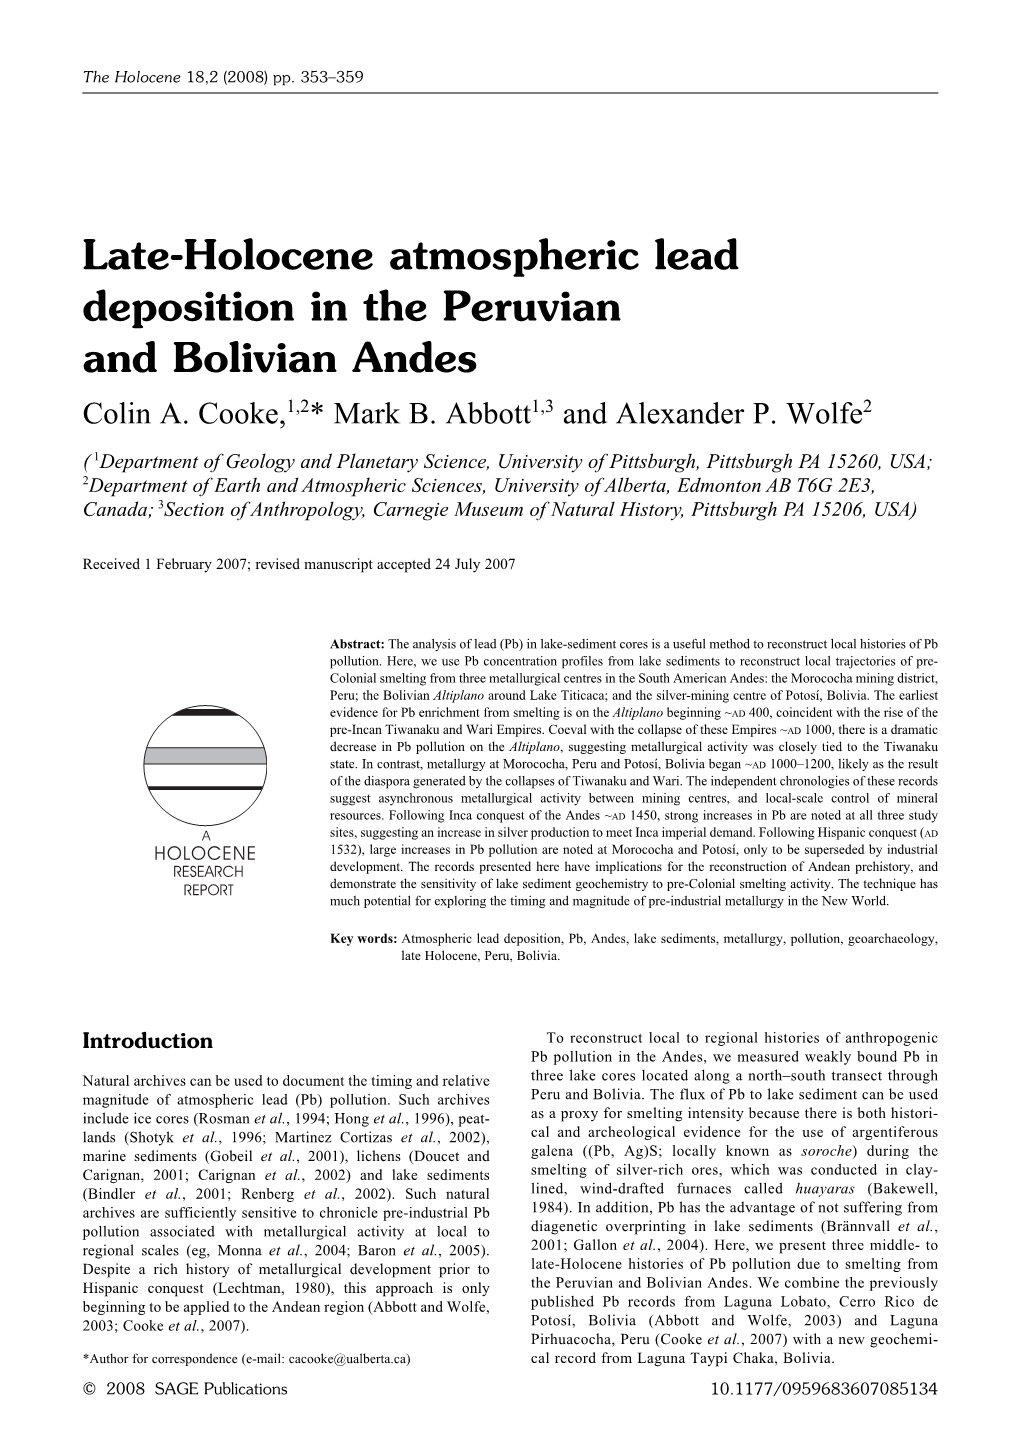 Late-Holocene Atmospheric Lead Deposition in the Peruvian and Bolivian Andes Colin A